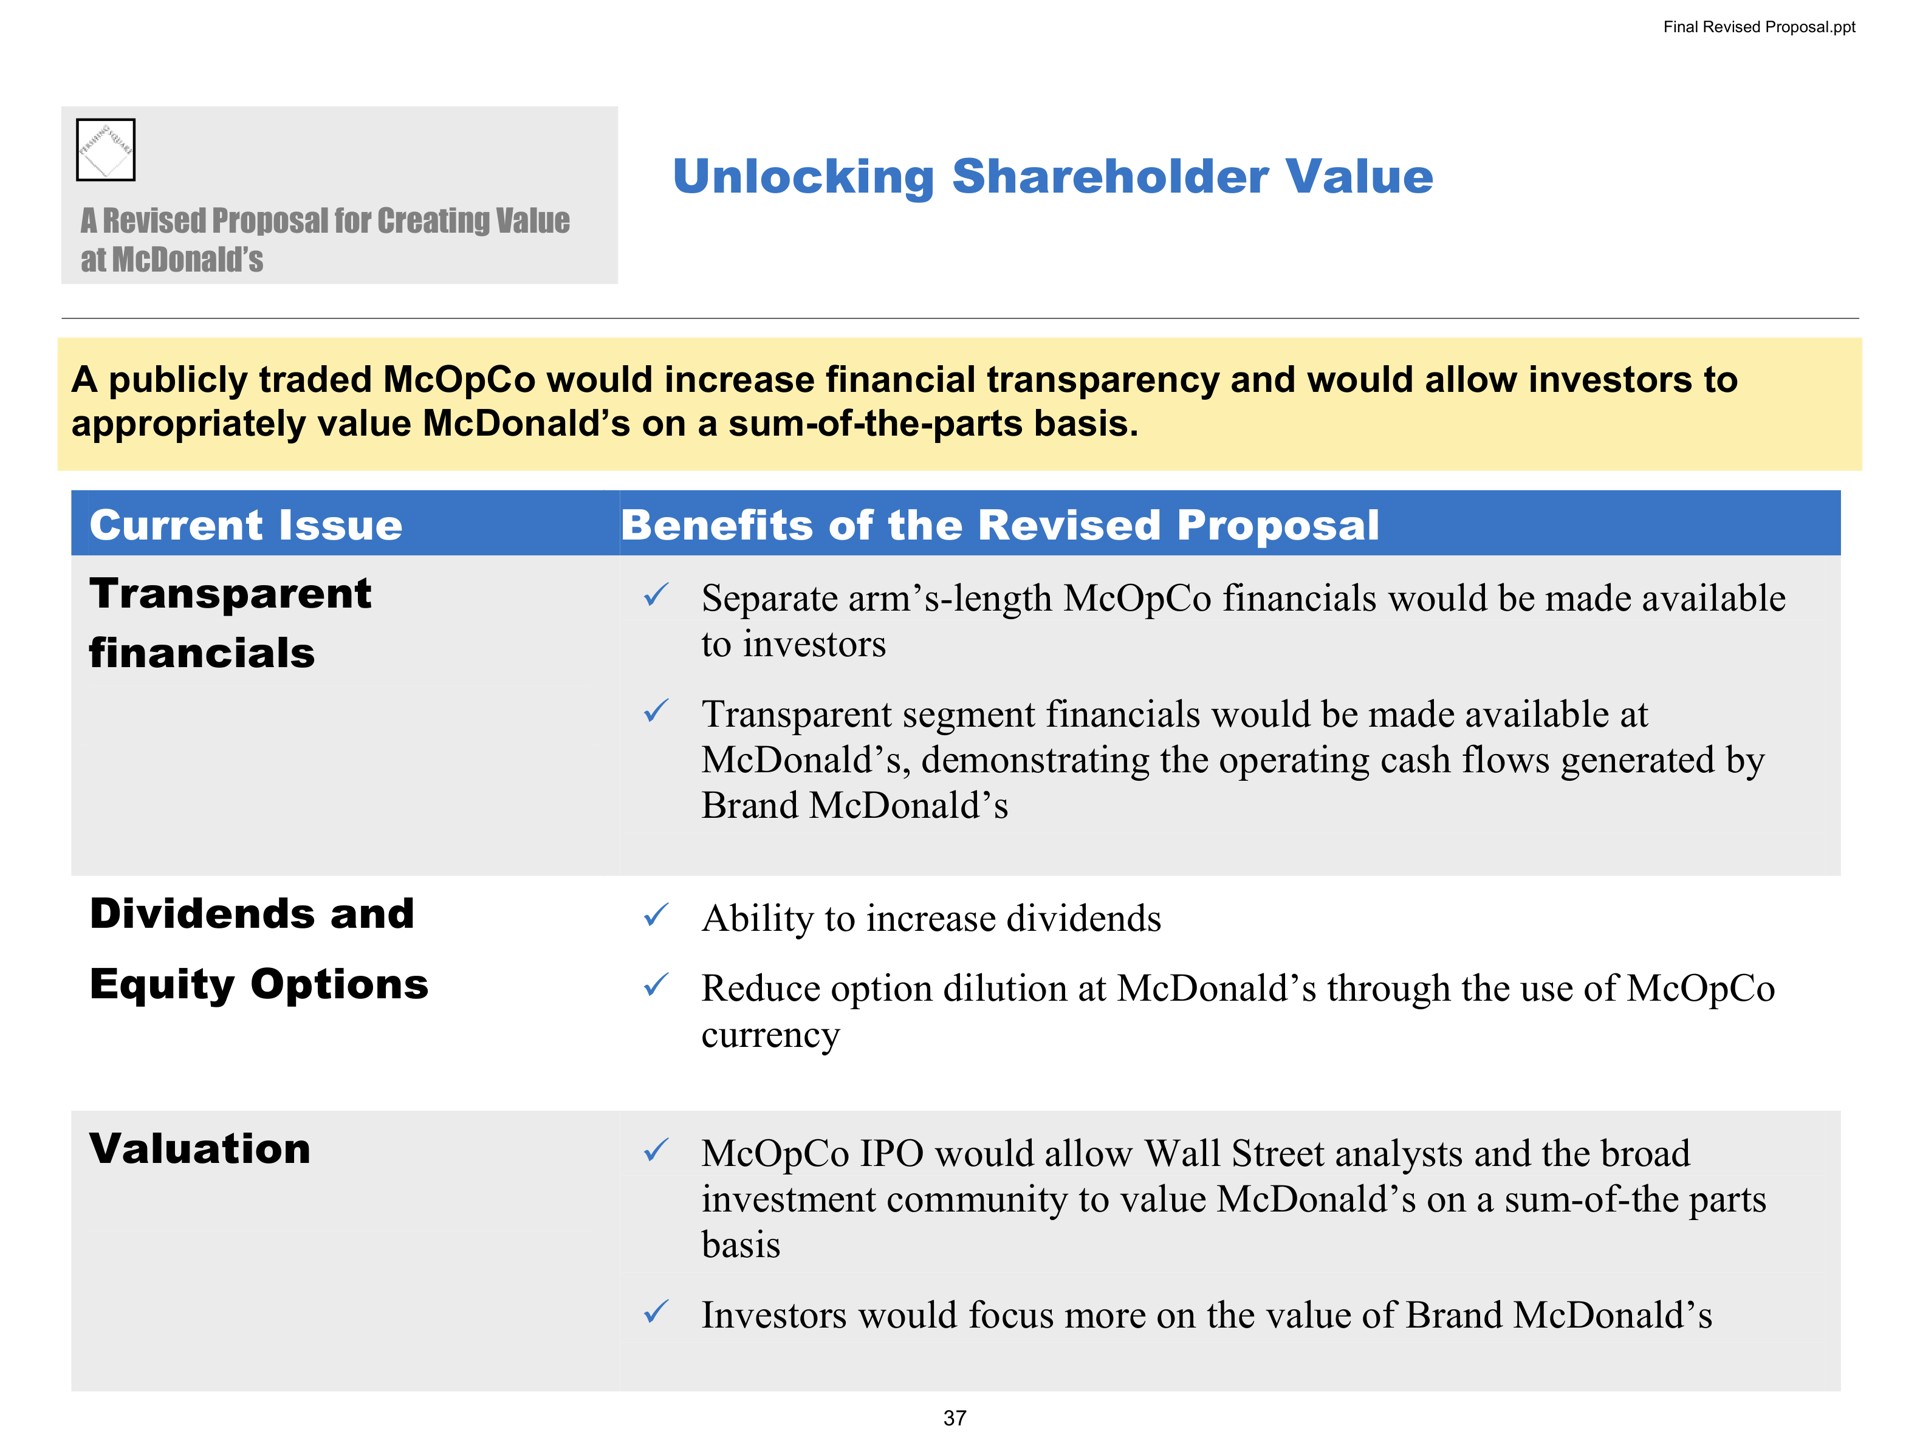 unlocking shareholder value a publicly traded would increase financial transparency and would allow investors to appropriately value on a sum of the parts basis current issue benefits of the revised proposal transparent dividends and equity options valuation separate arm length would be made available to investors transparent segment would be made available at demonstrating the operating cash flows generated by brand ability to increase dividends reduce option dilution at through the use of currency would allow wall street analysts and the broad investment community to value on a sum of the parts basis investors would focus more on the value of brand | Pershing Square